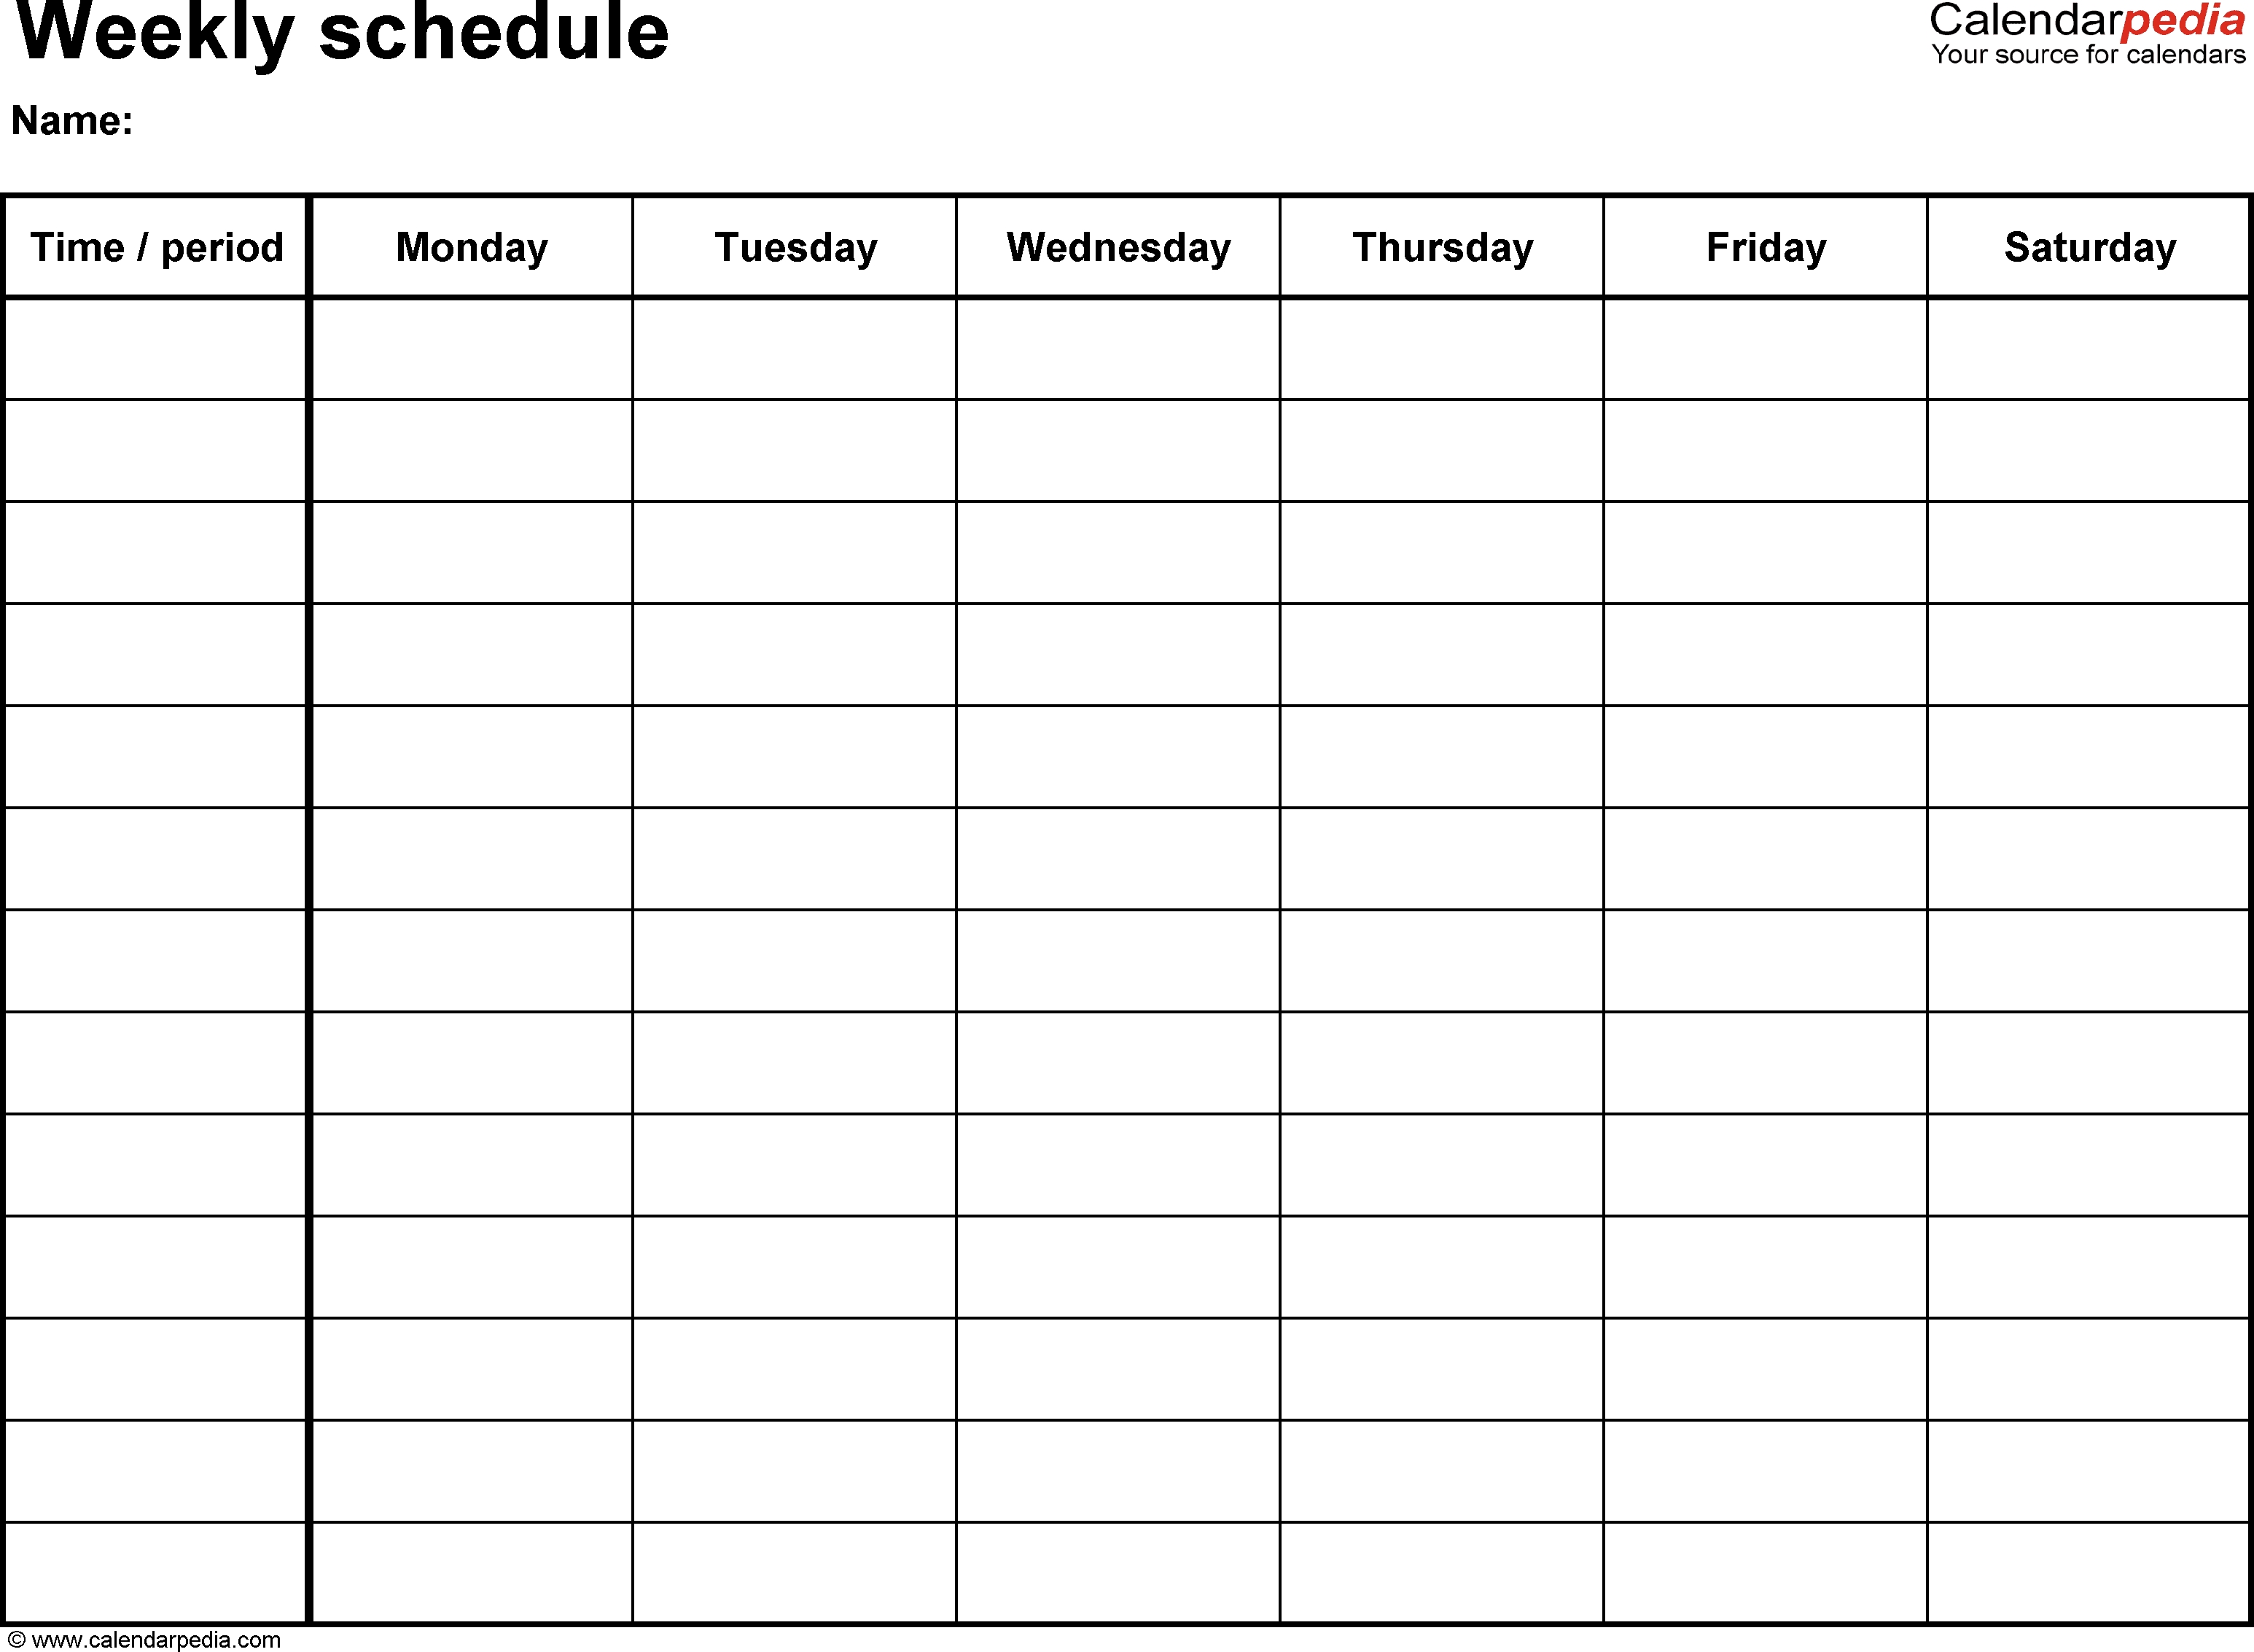 Free Weekly Schedule Templates For Word - 18 Templates pertaining to Free One Week Schedule Template